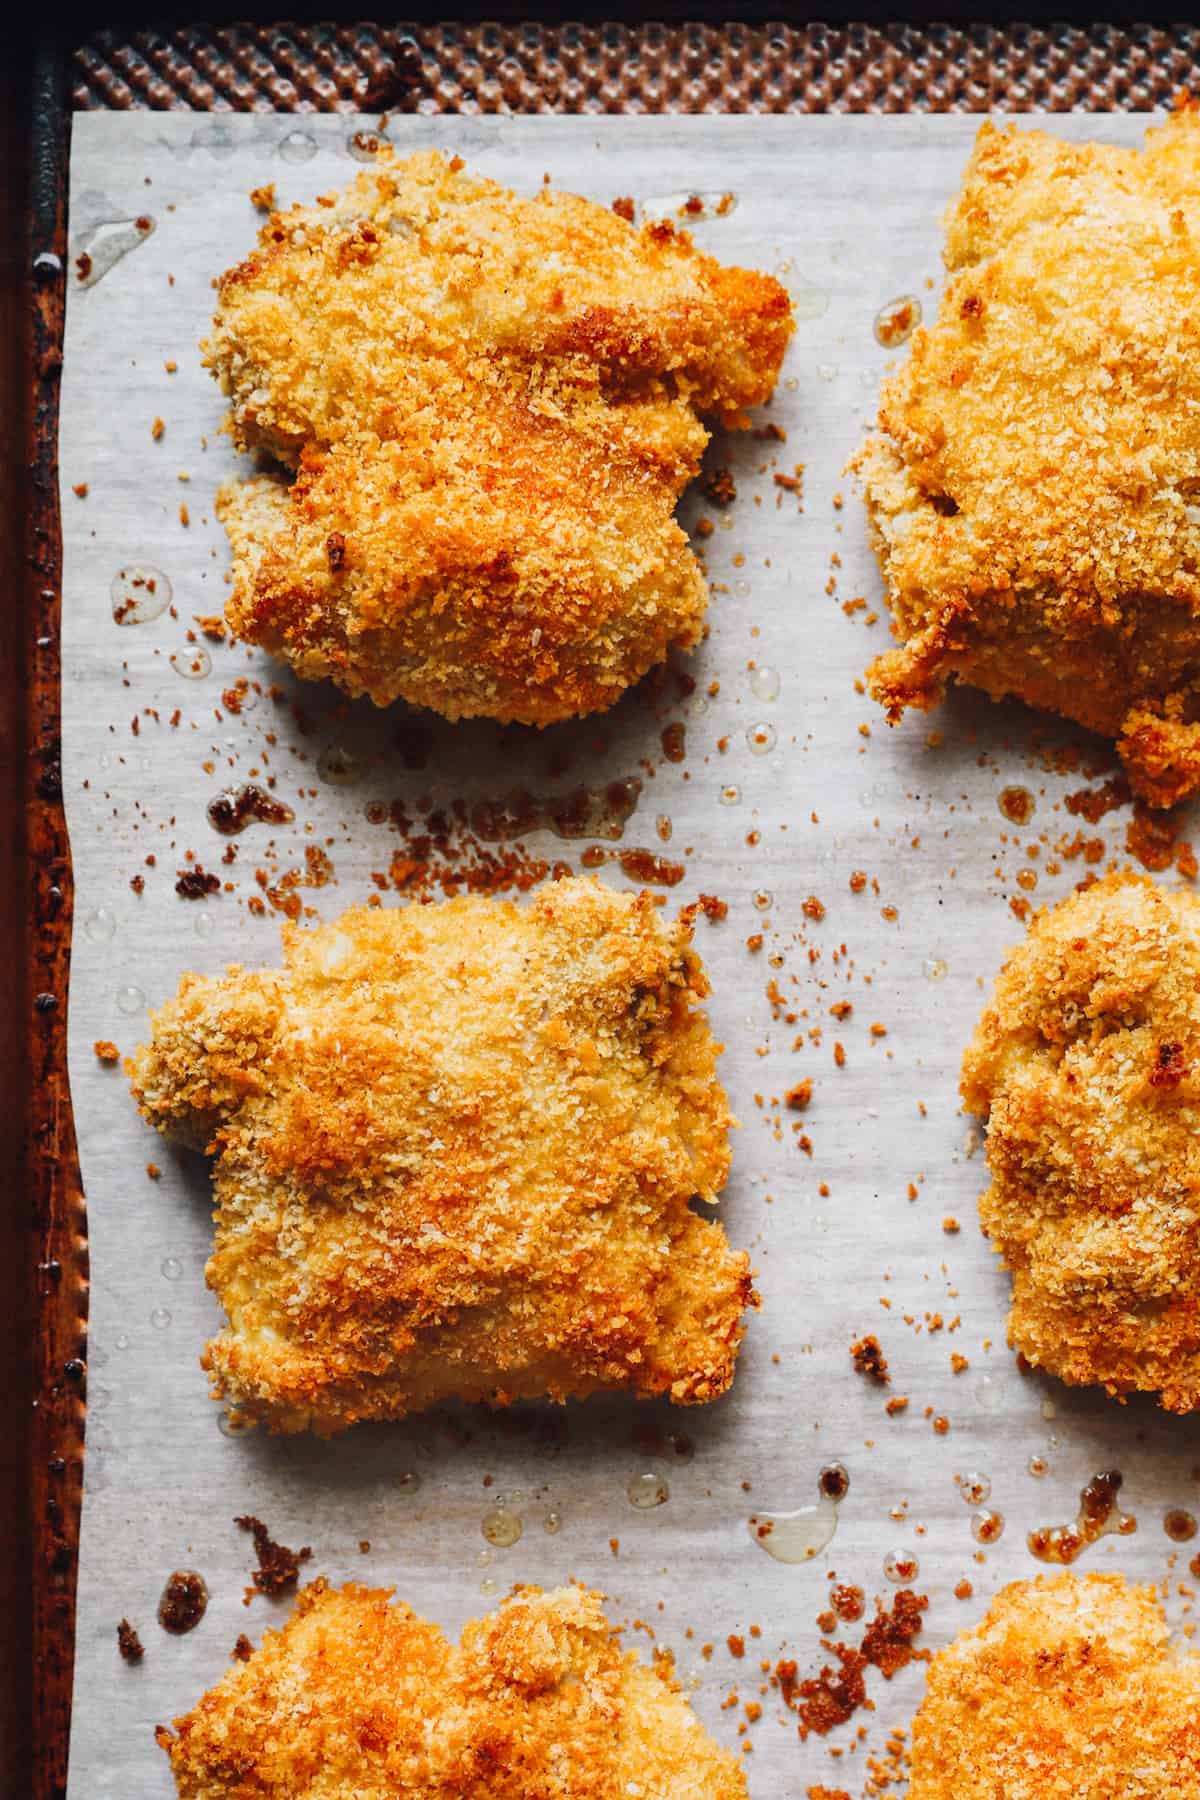 chicken thighs coated in breadcrumbs, on a parchment paper lined baking sheet after baking.